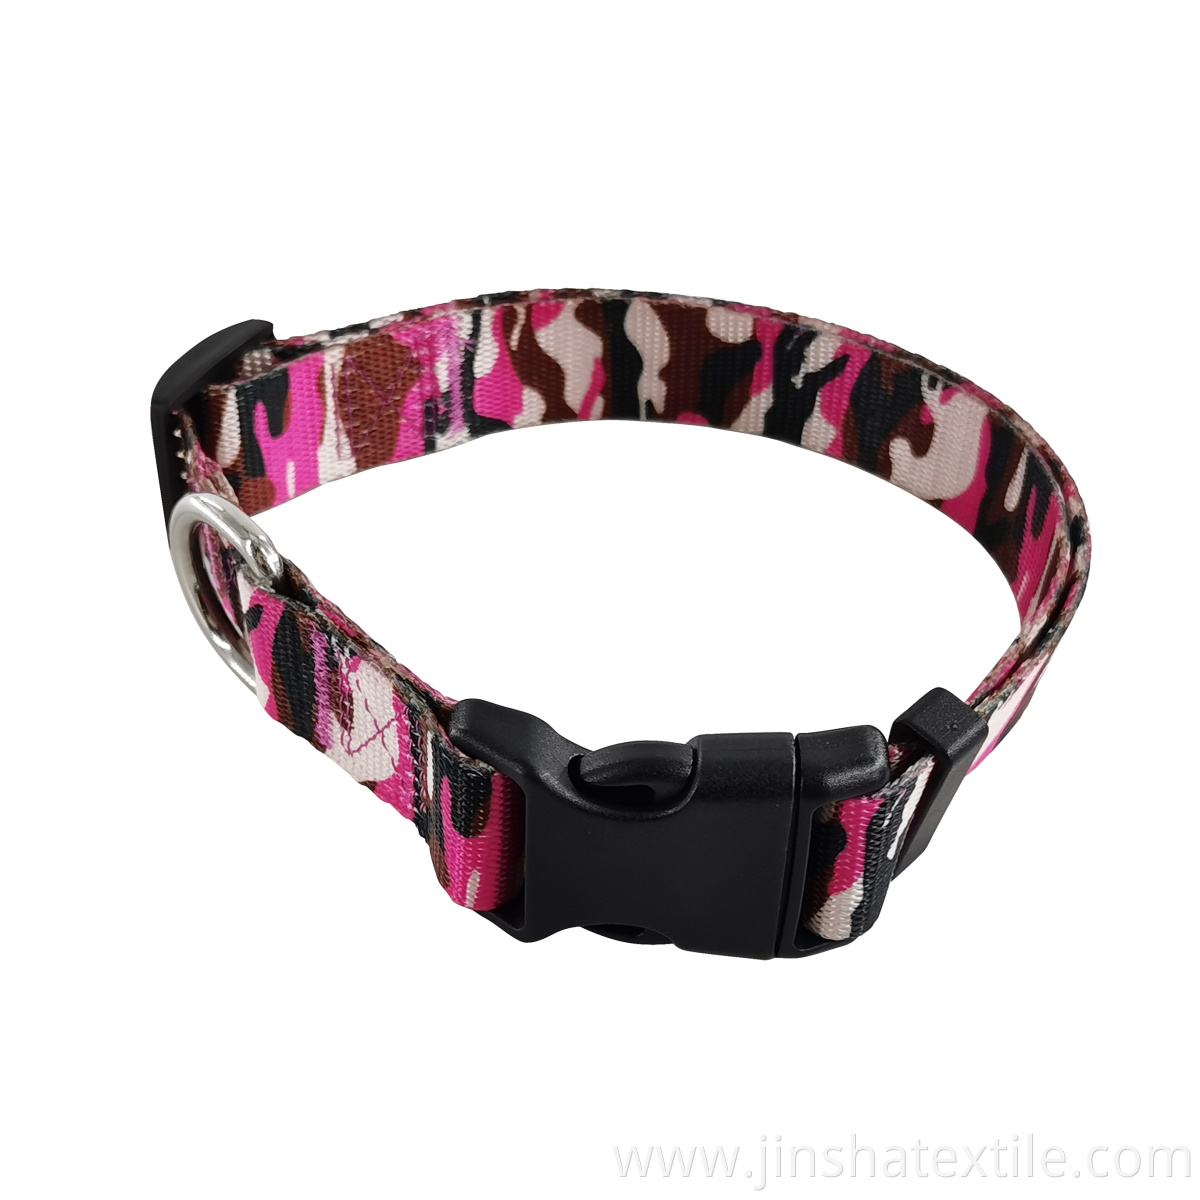 Factory wholesale 25mm led pet collar can be customized color logo pattern led pet collars